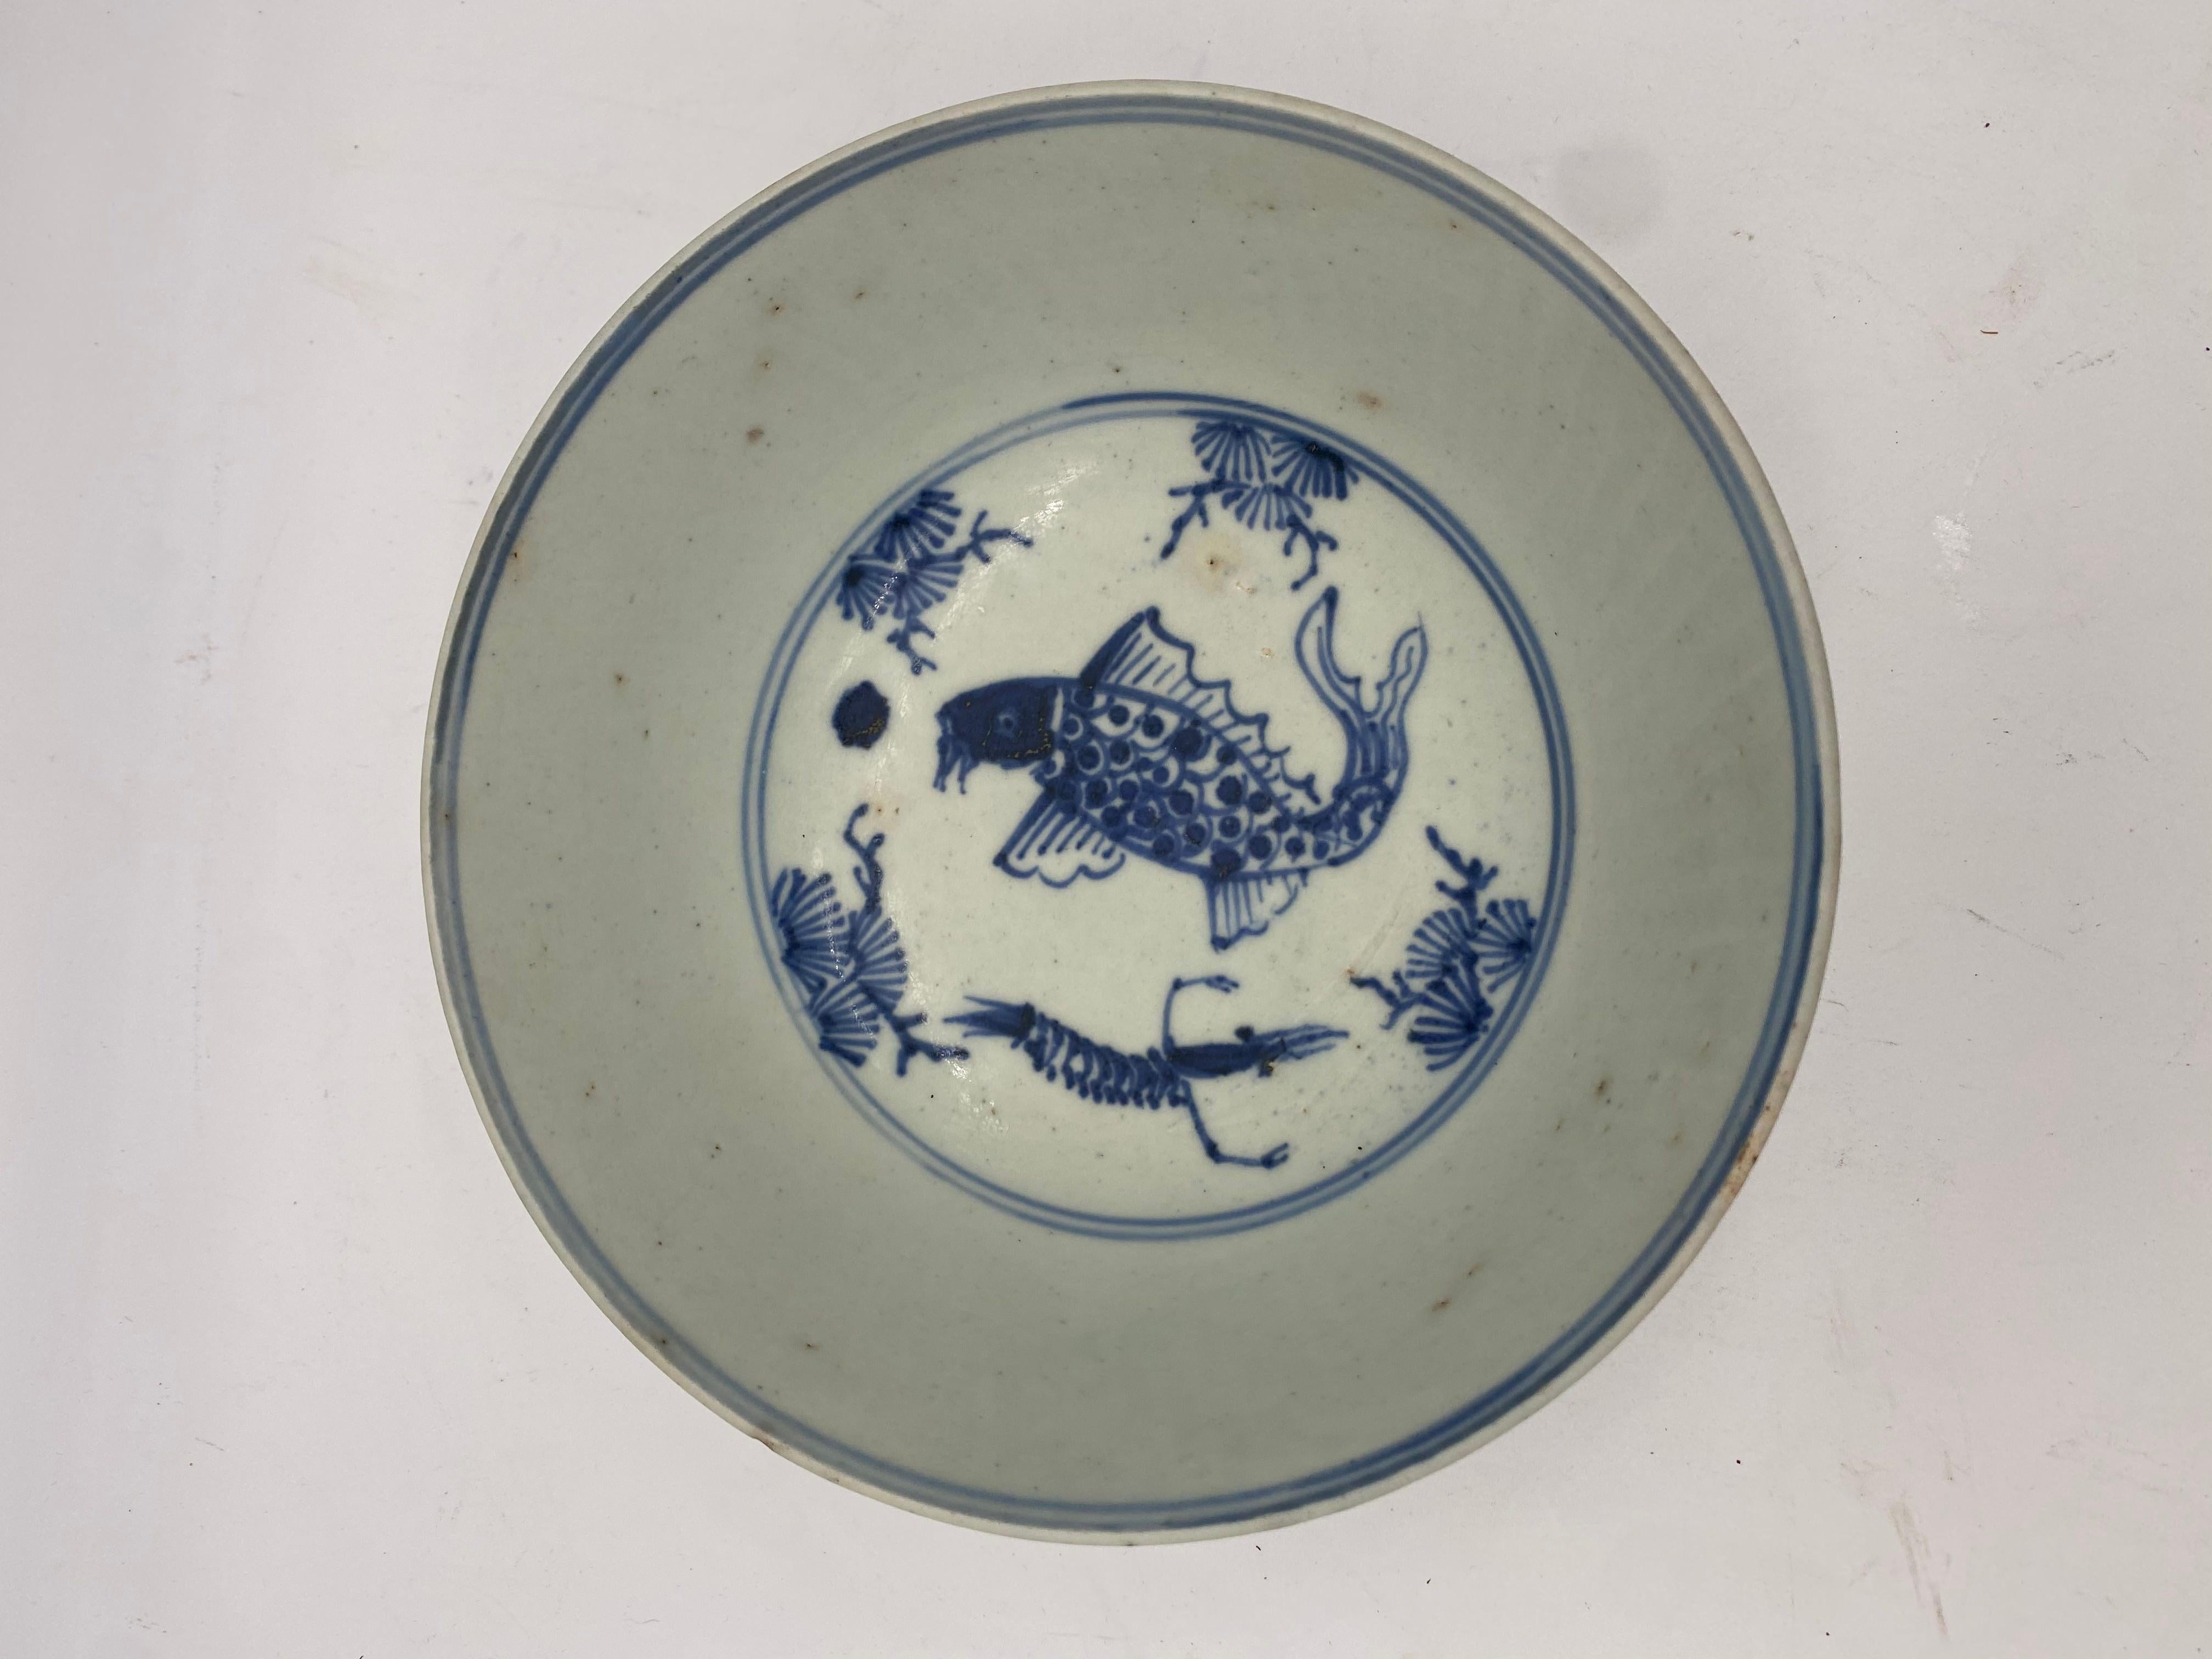 Qing dynasty blue and white Chinese porcelain bowl with mark, inside with fish and shrimp, external with dragon.